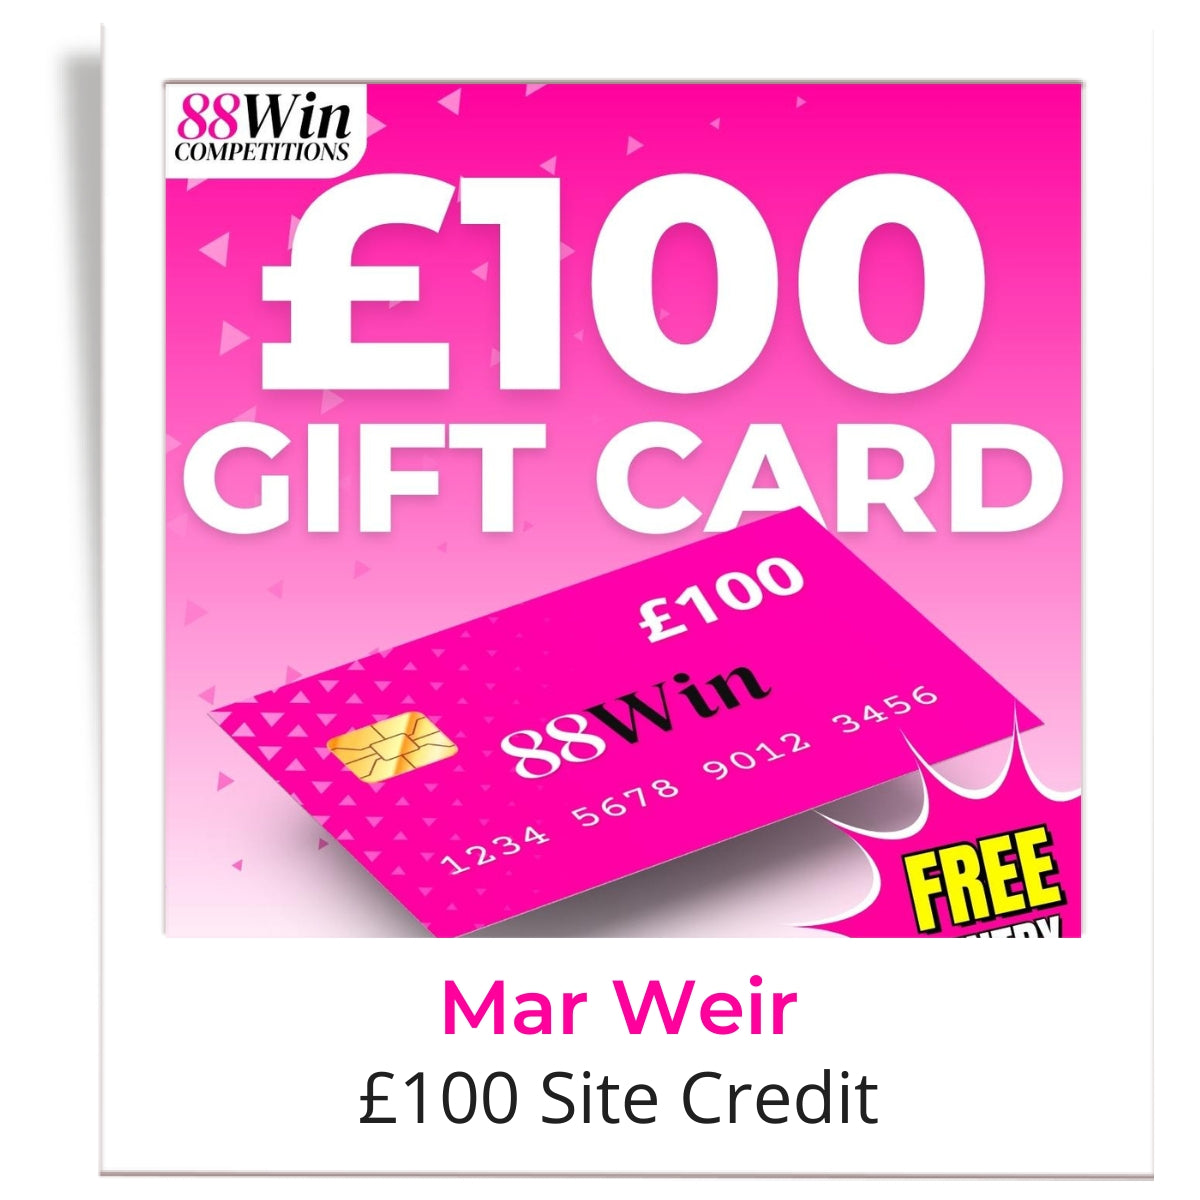 88Win Competitions Winner Photo £100 Gift Card